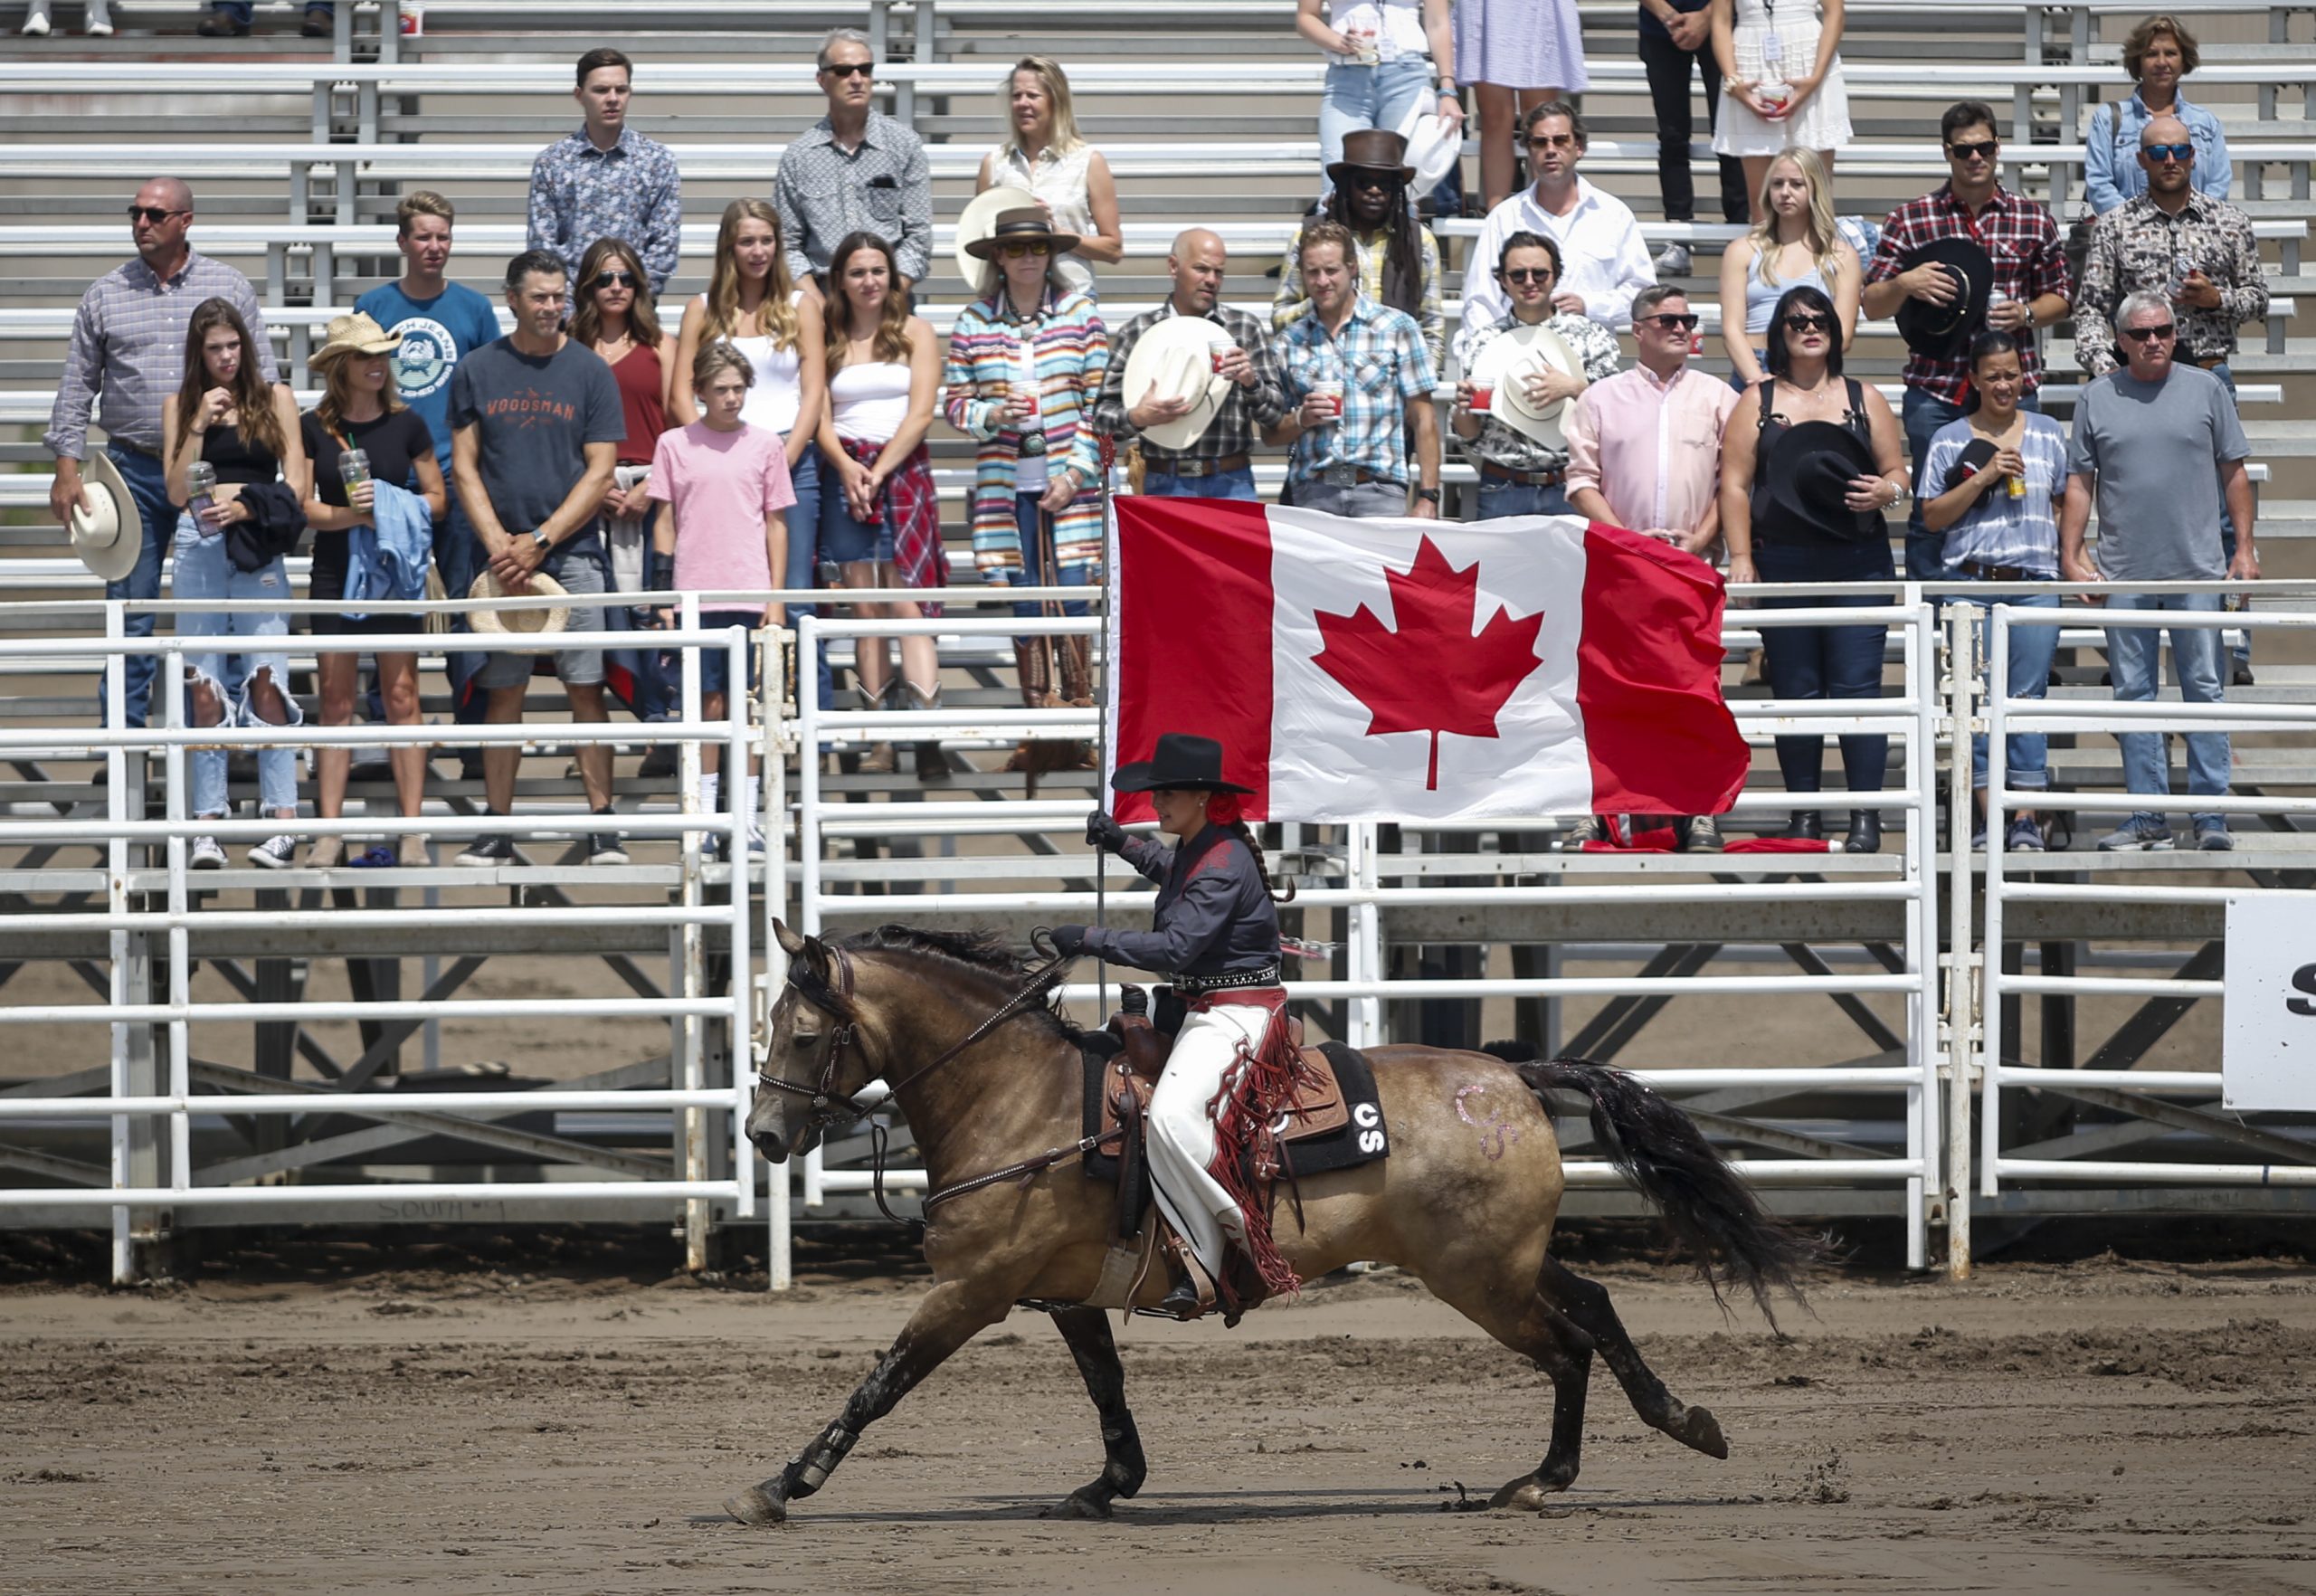 Calgary Stampede wraps up with free admission today